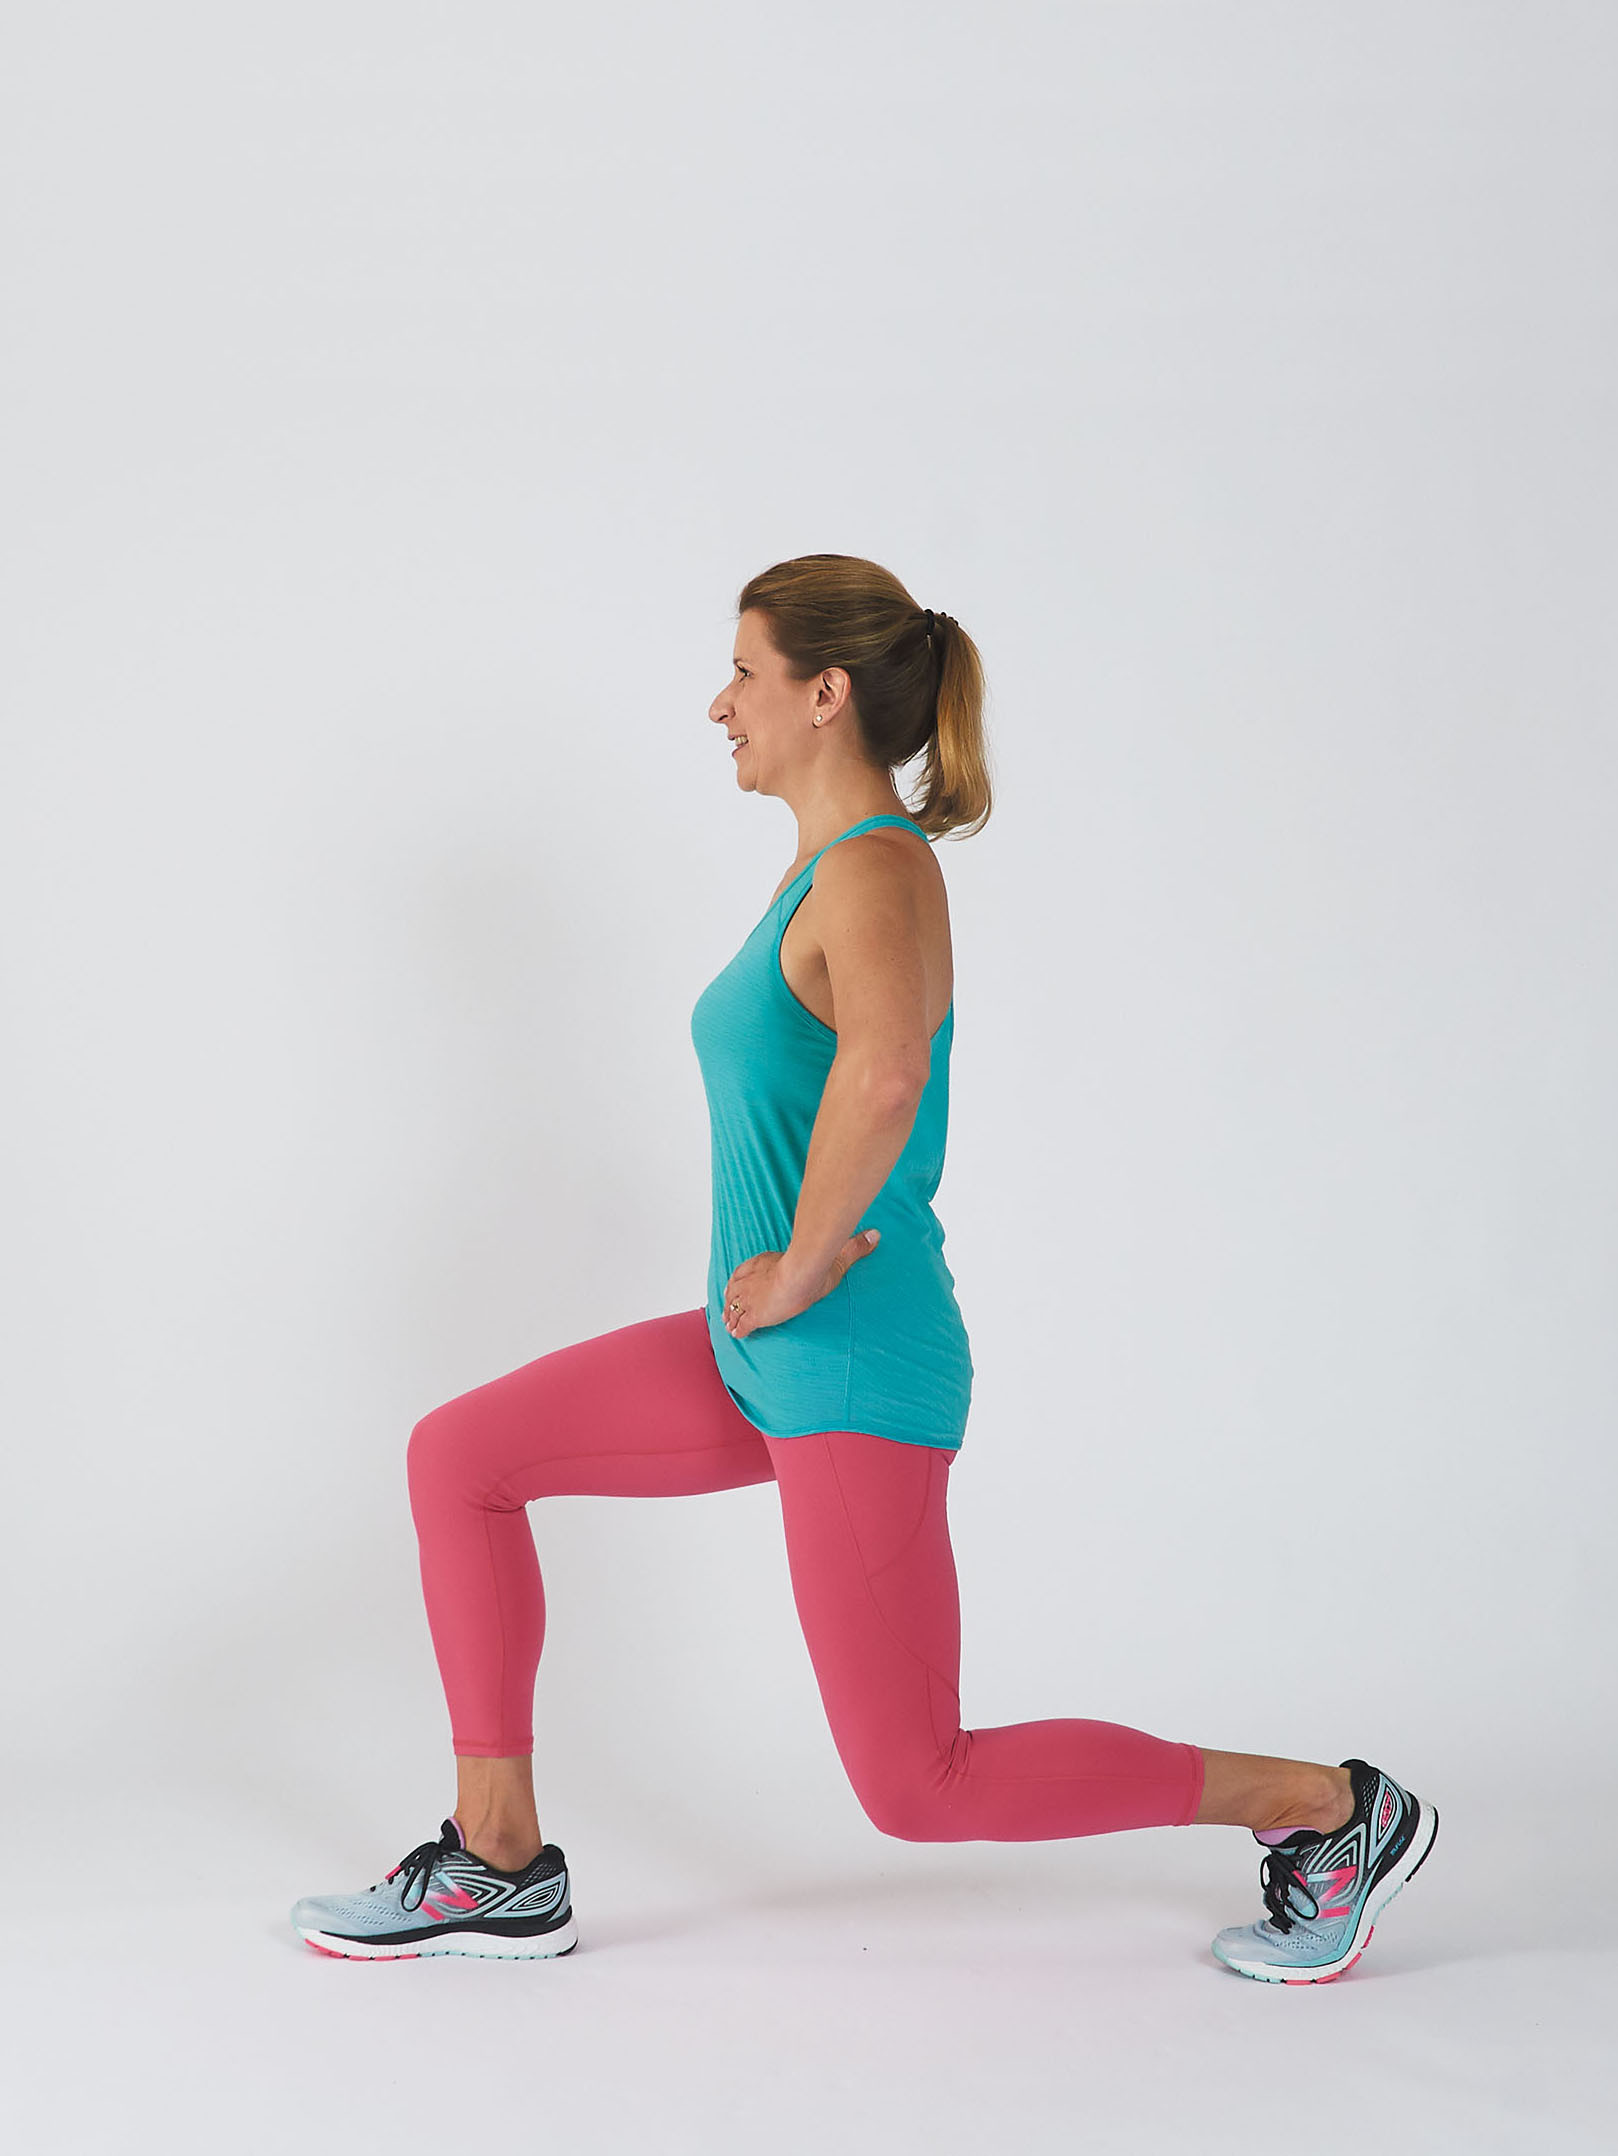 photo of a person performing the stationary lunge exercise, showing the movement